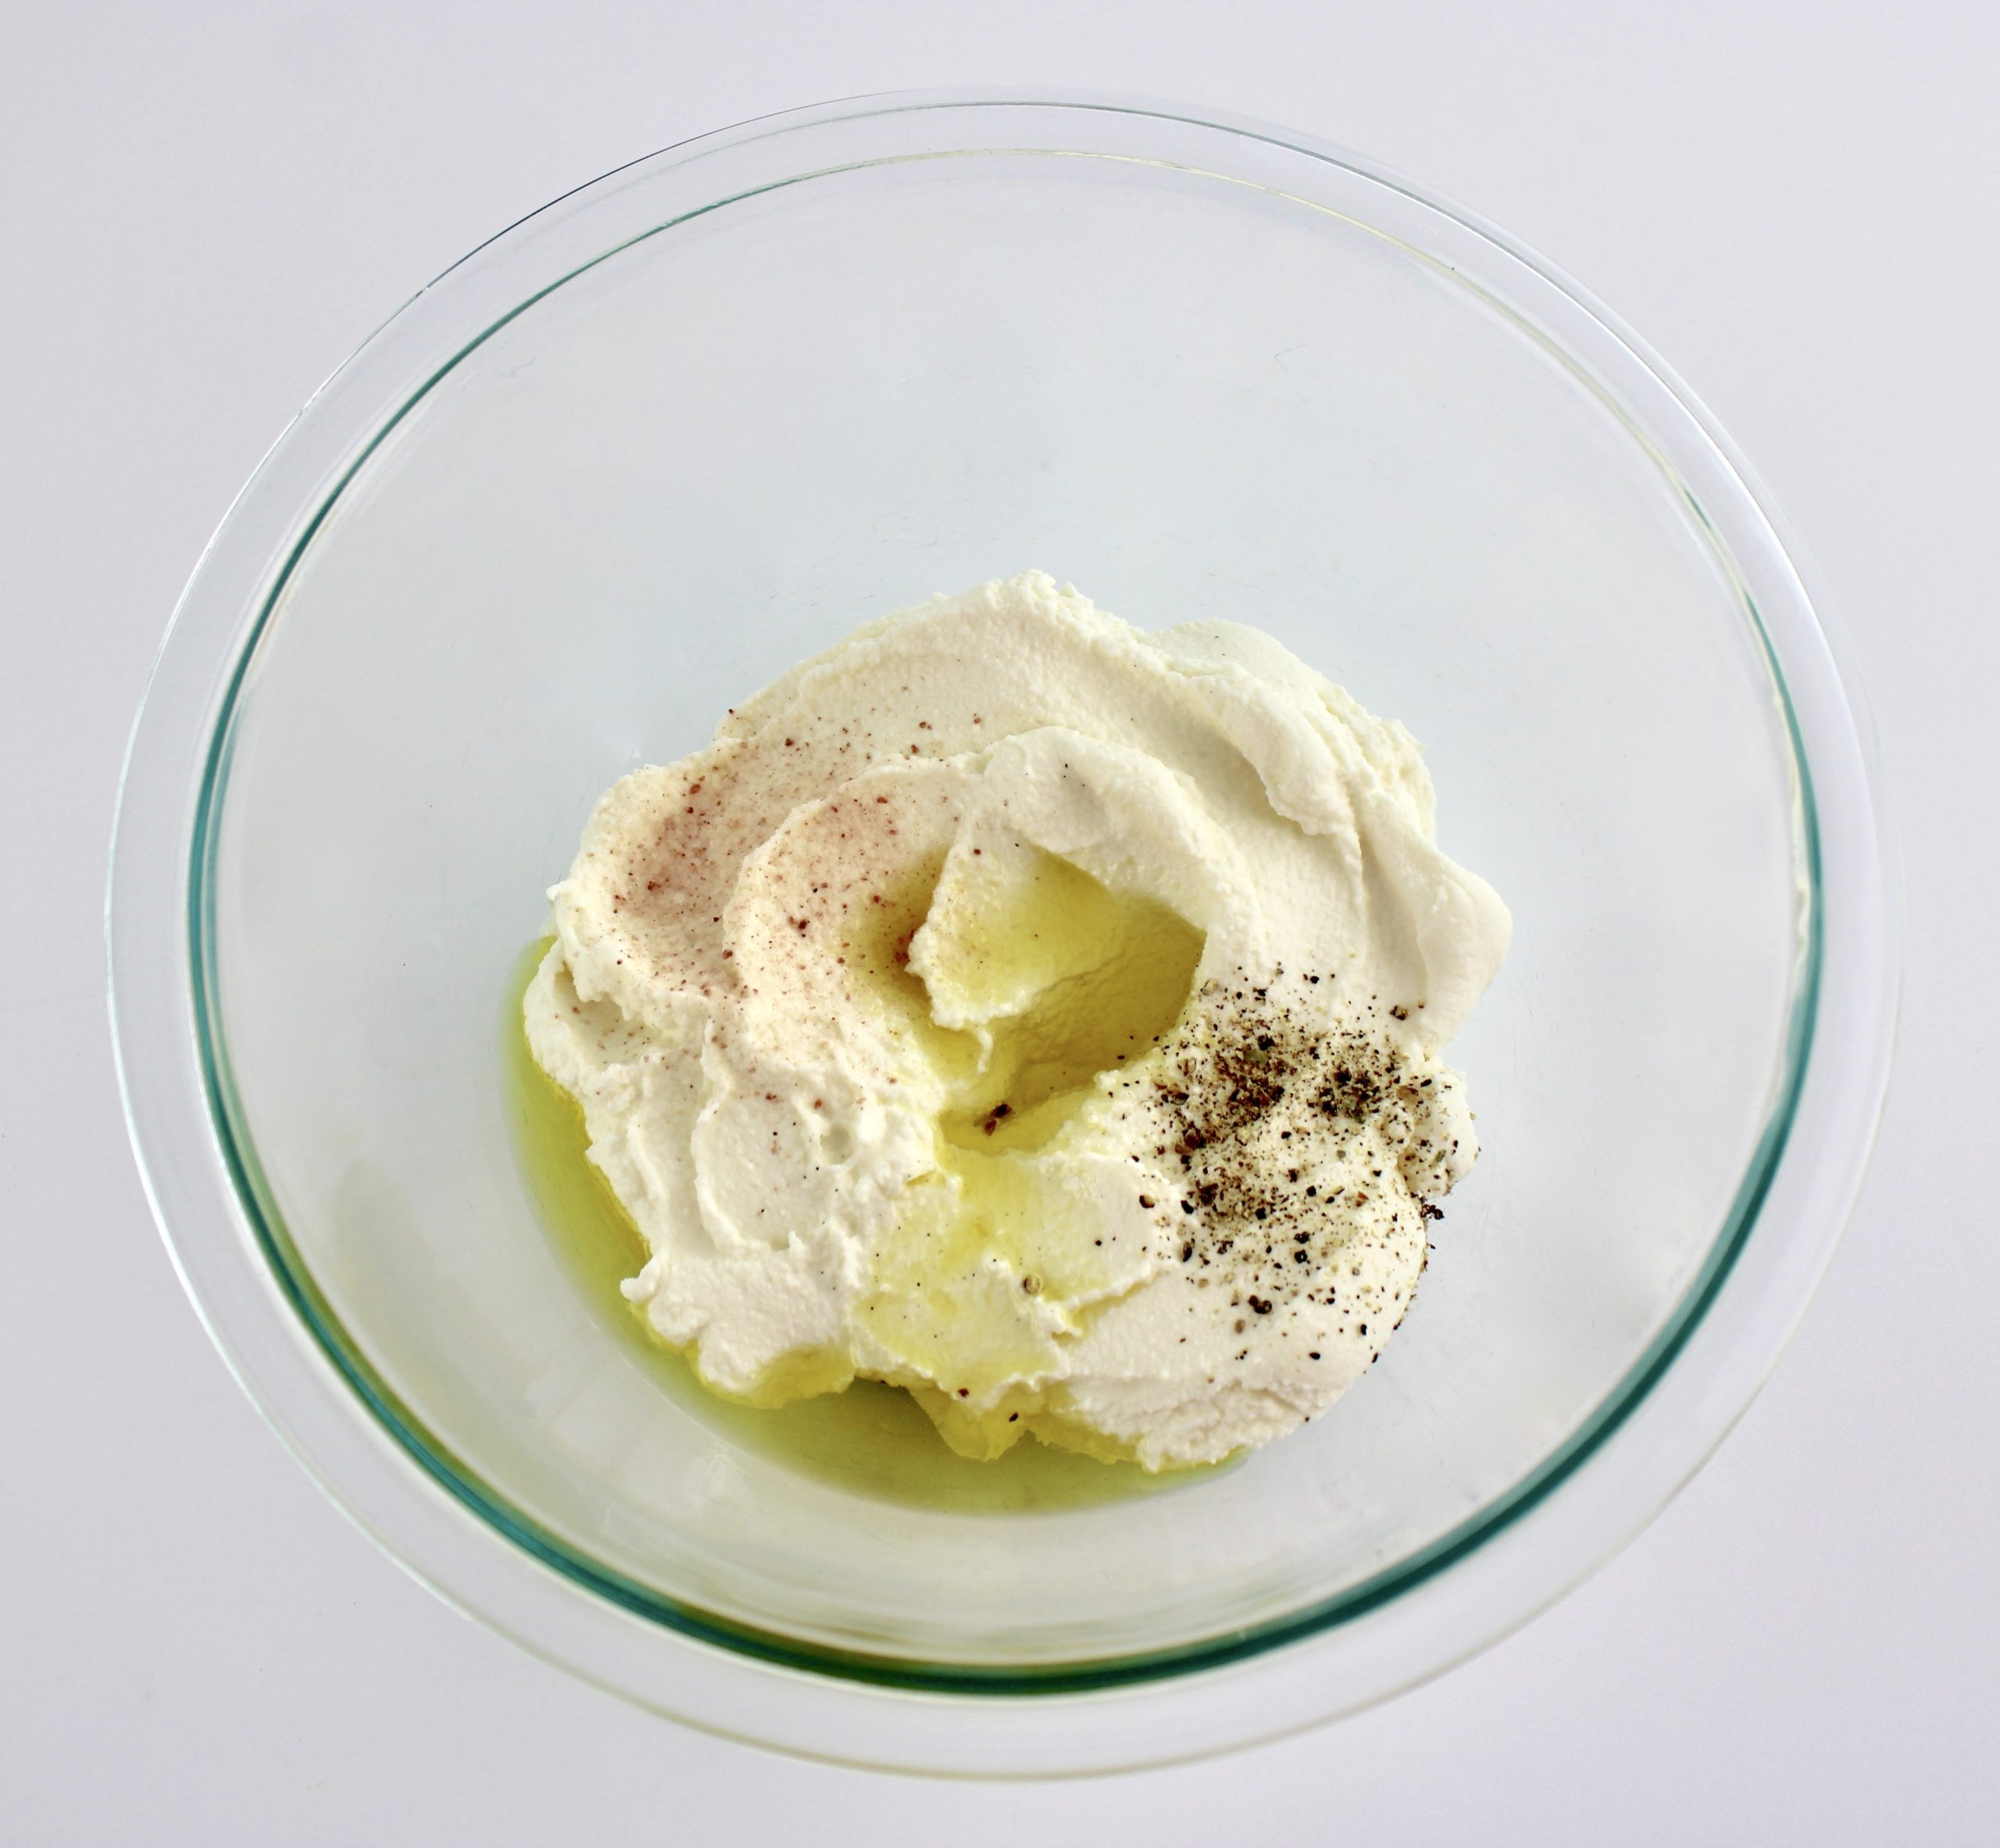 ricotta olive oil salt and pepper in mixing bowl unmixed